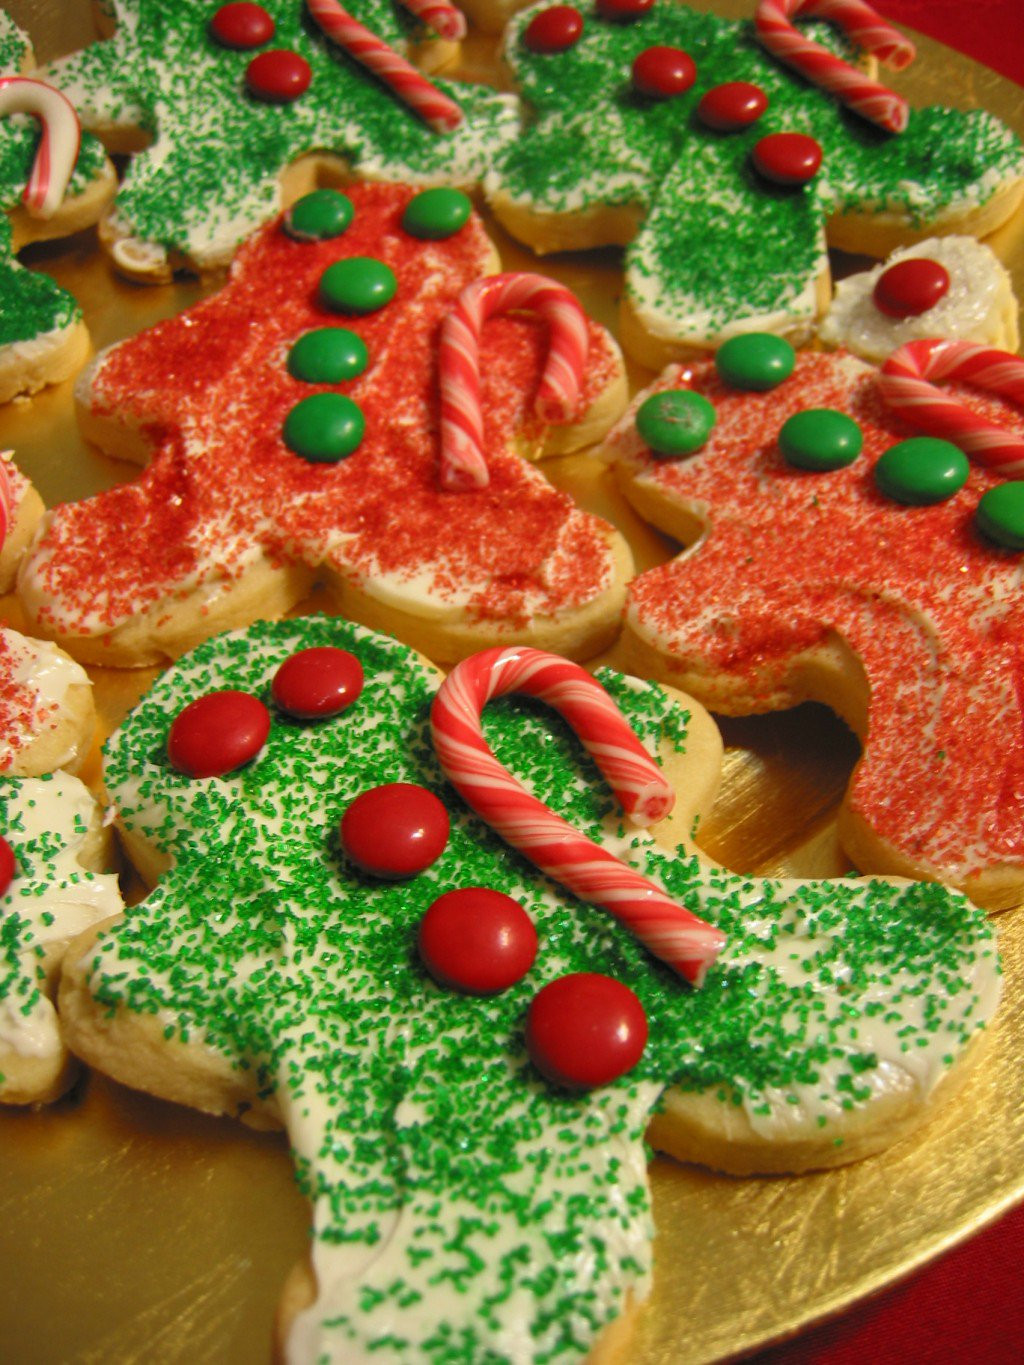 Quick Easy Christmas Cookies
 Decorate Gingerbread Men Quick and Easy Christmas Cookies